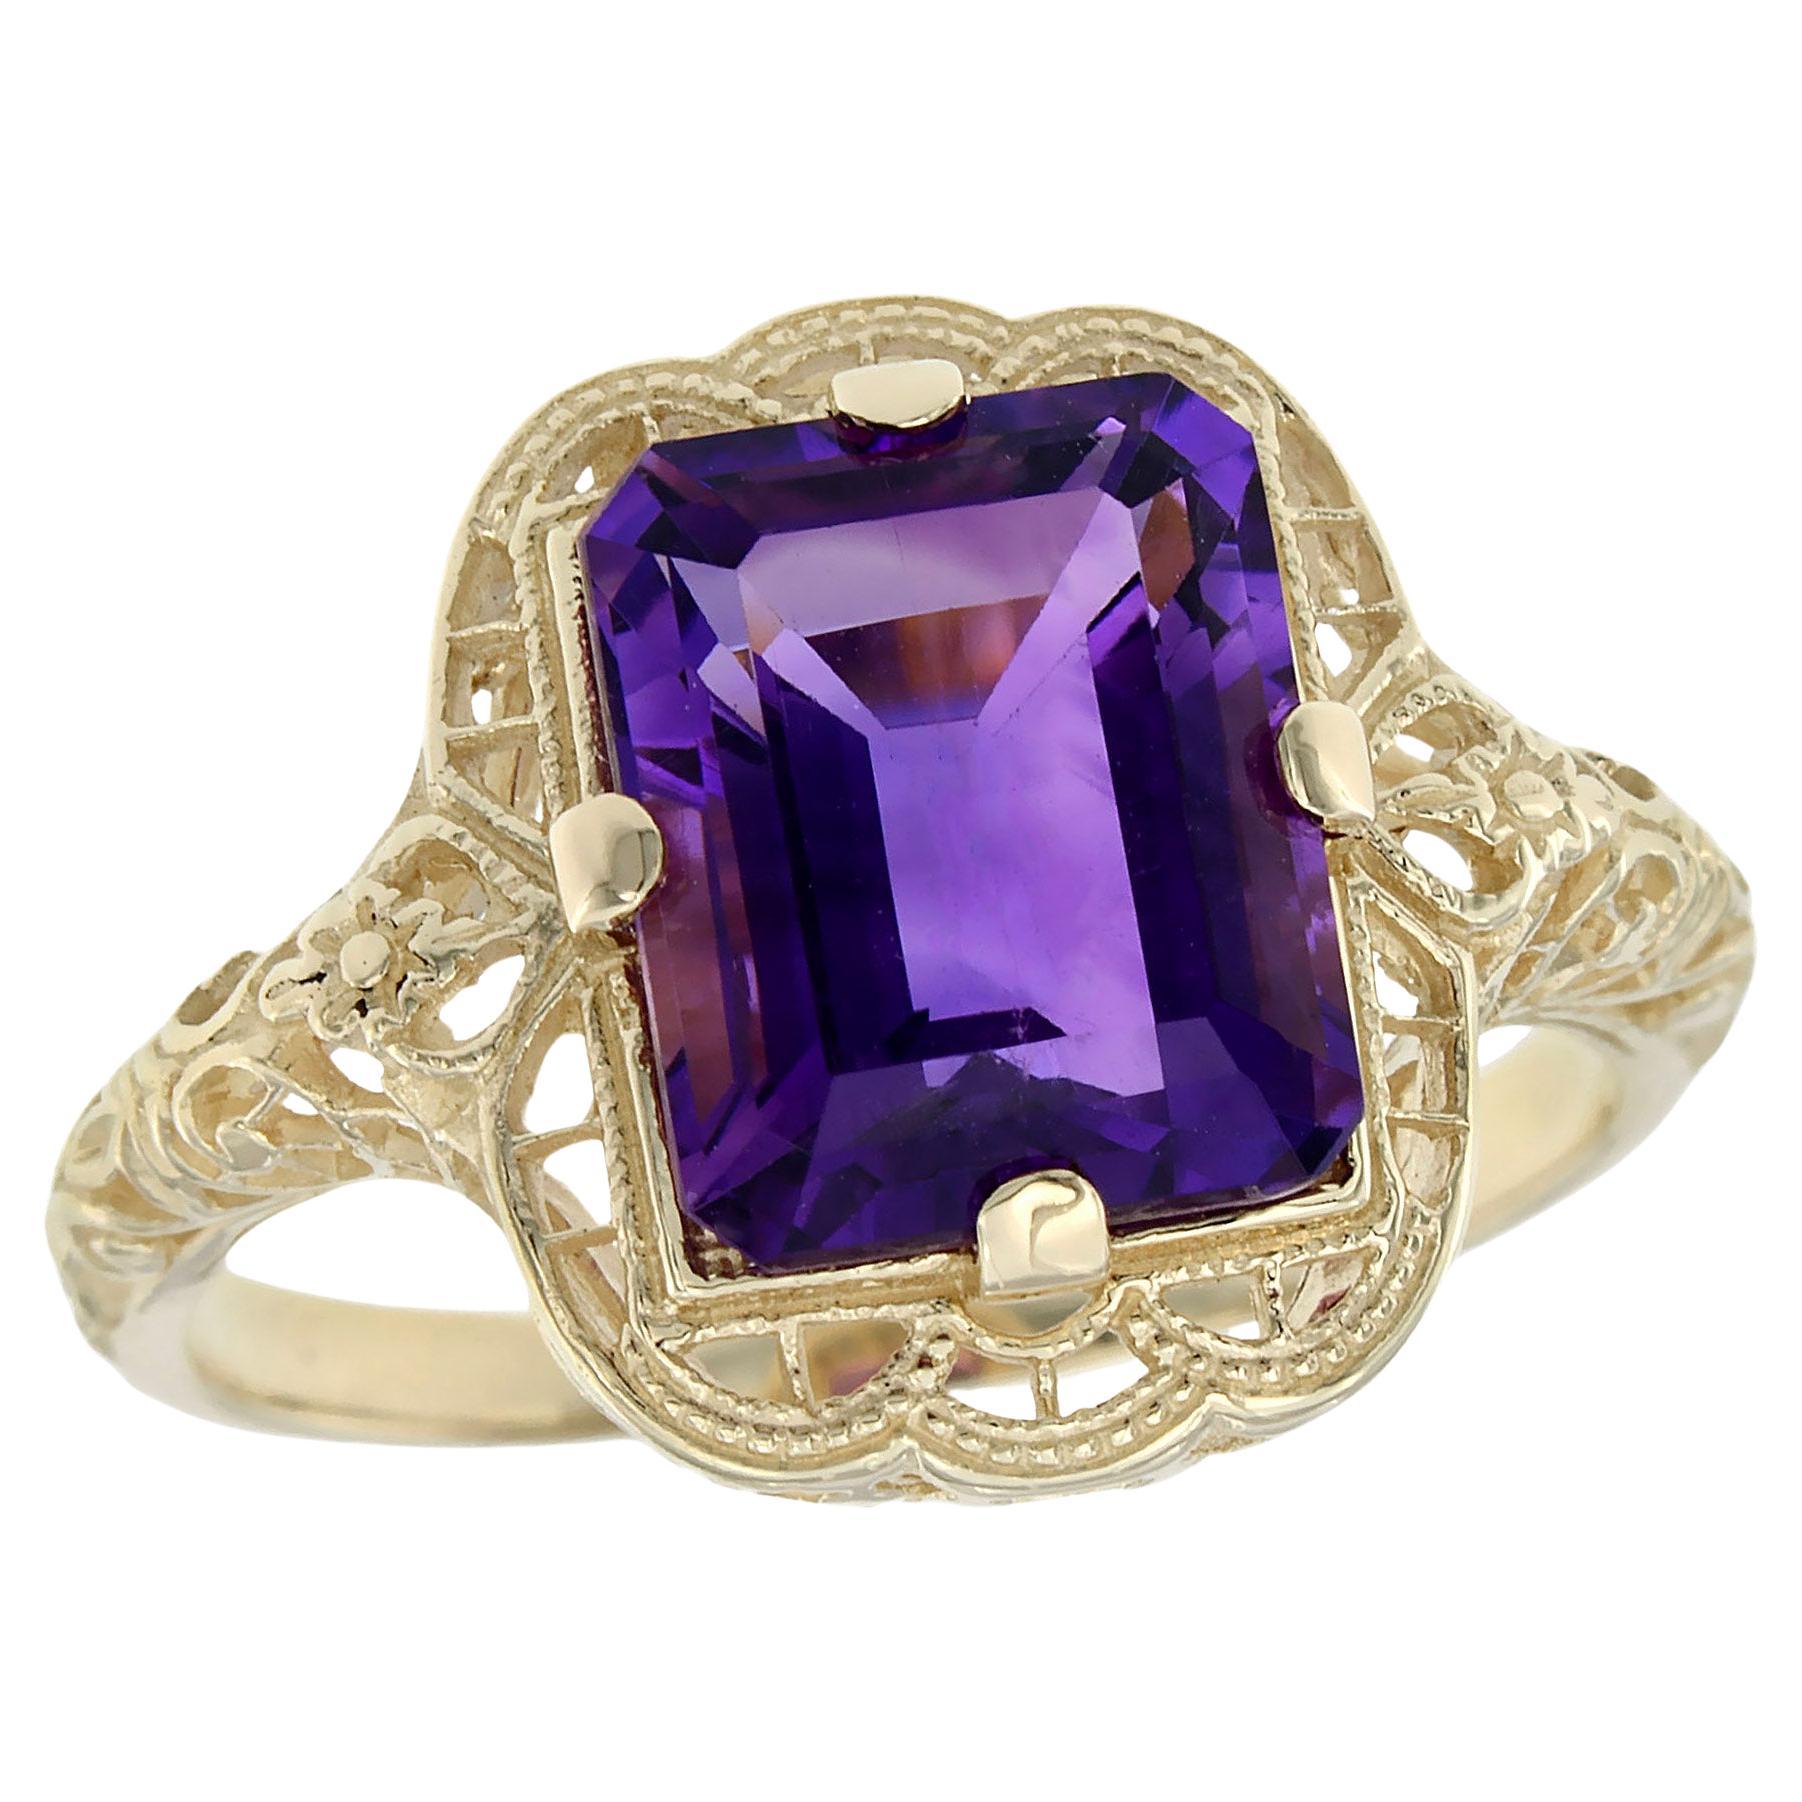 Natural Emerald Cut Amethyst Vintage Style Filigree Ring in Solid 9K Yellow Gold